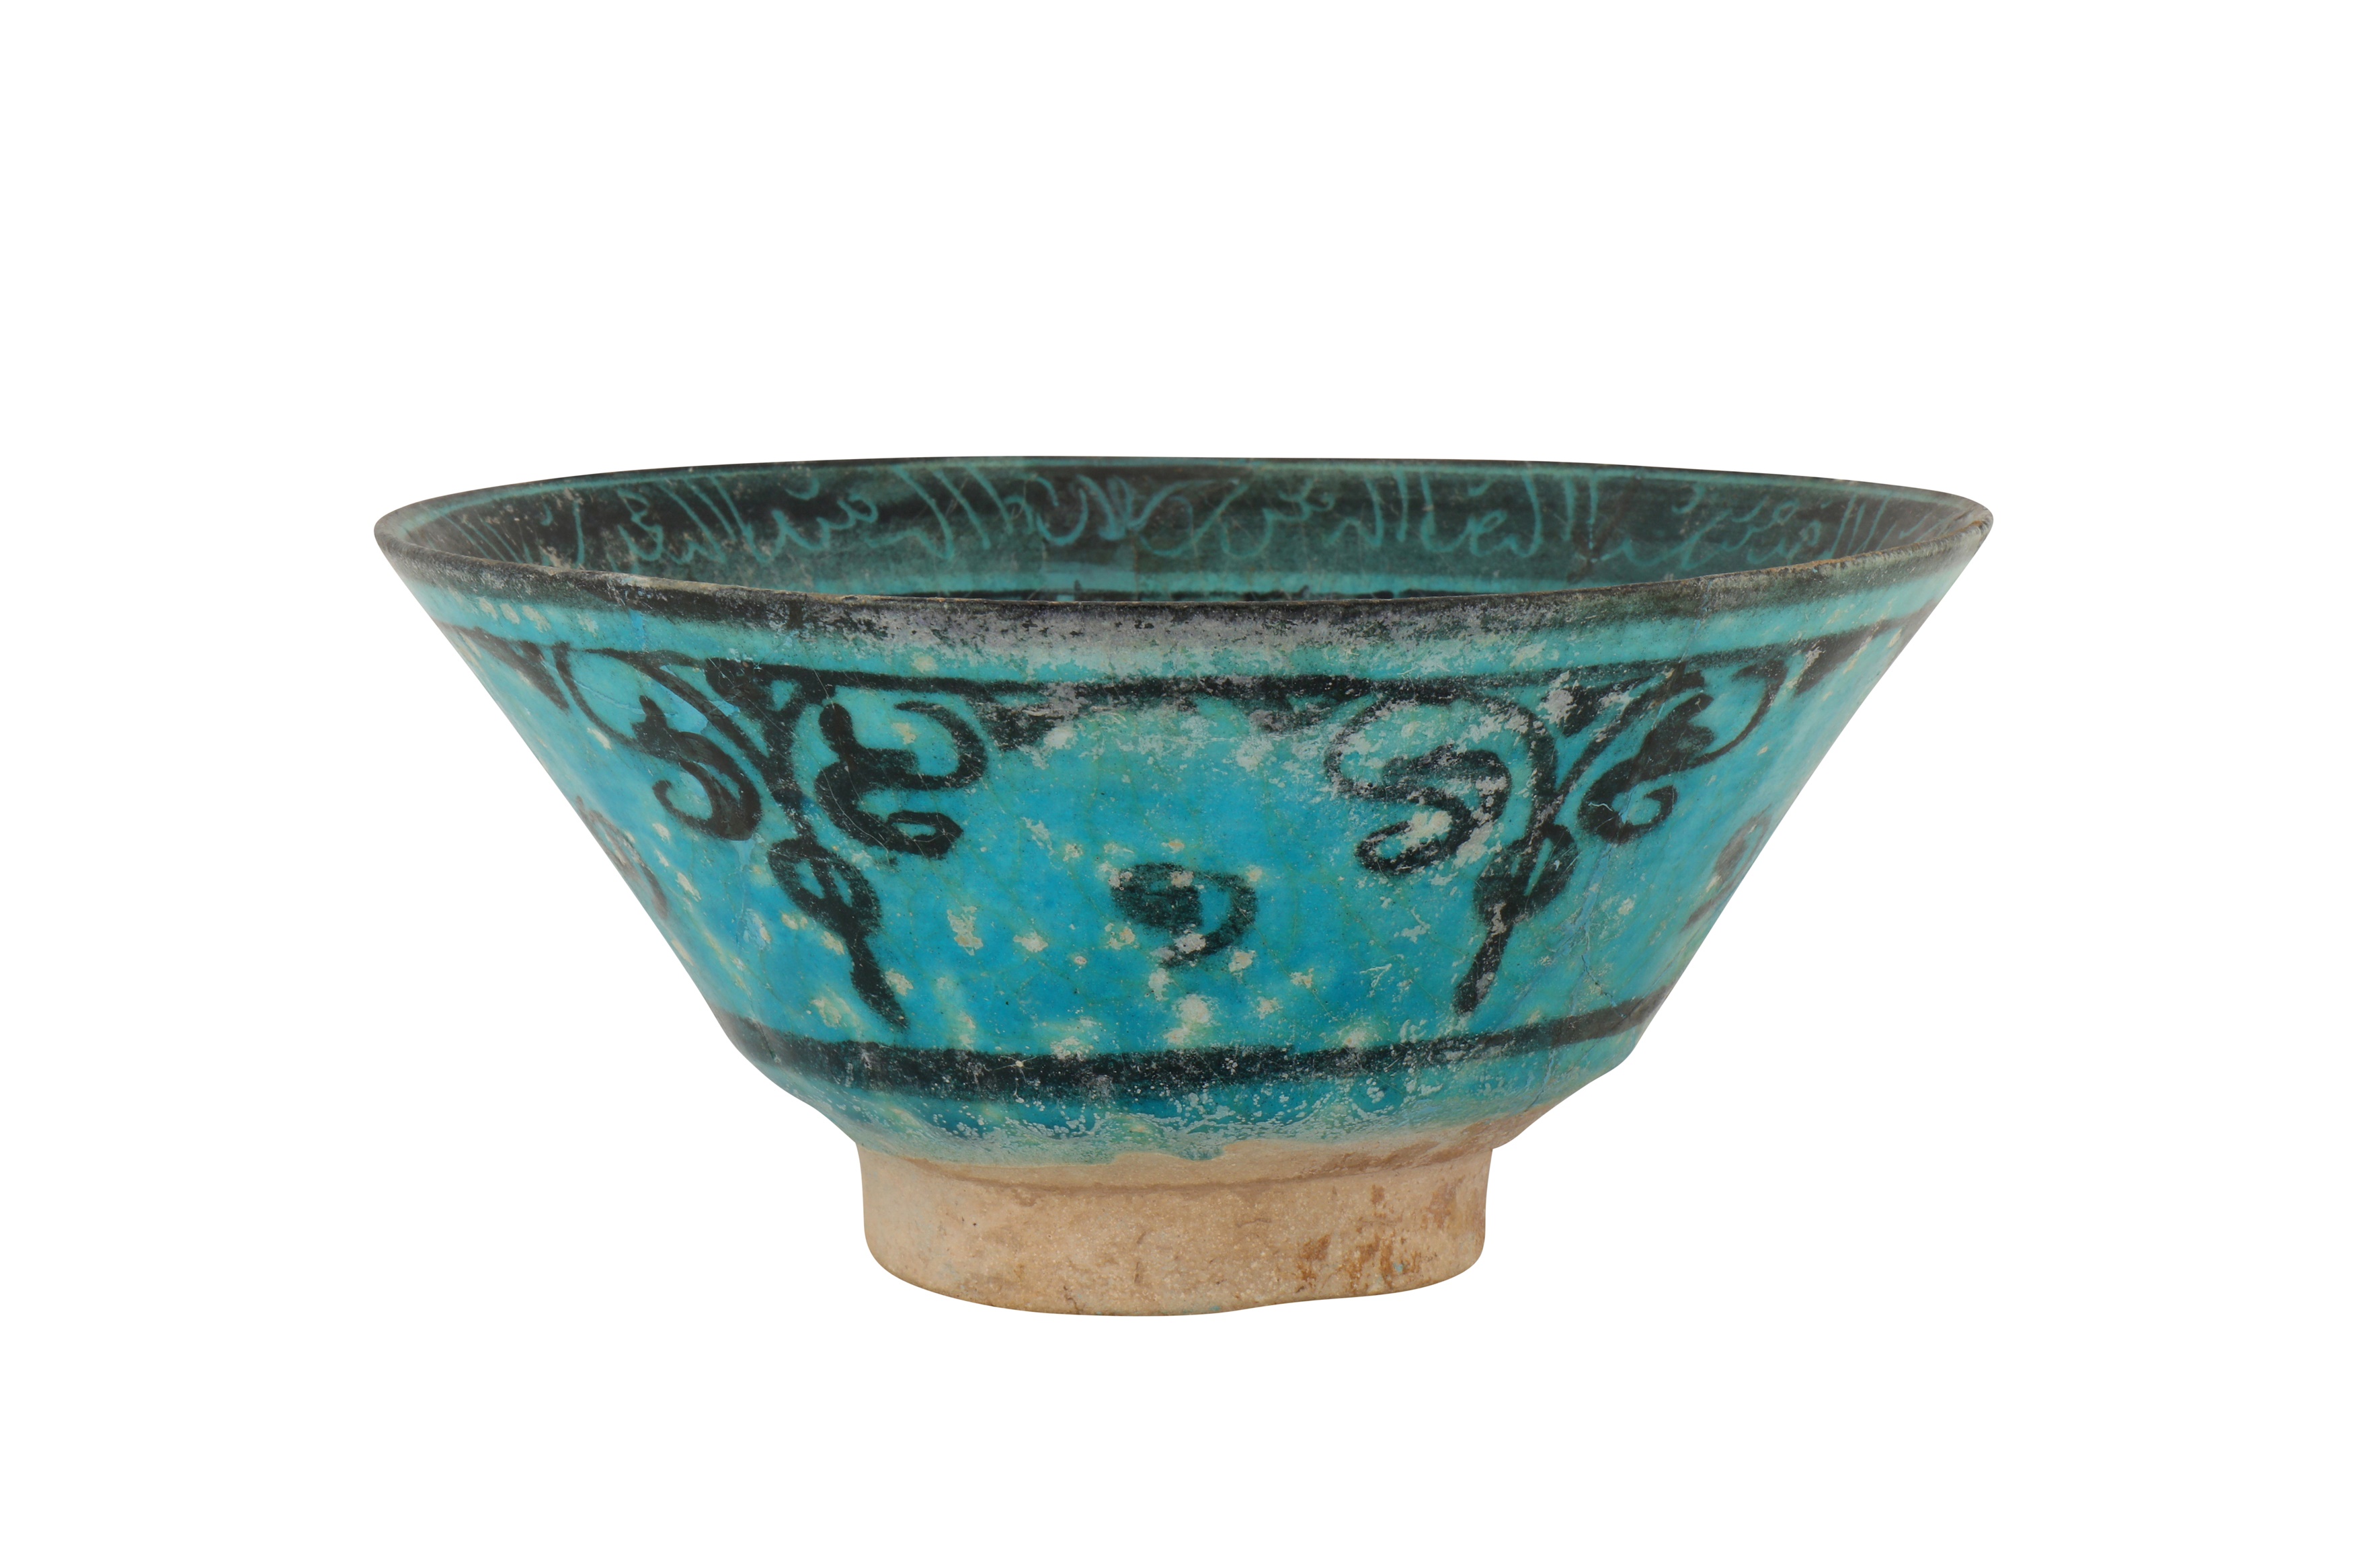 A 12TH CENTURY PERSIAN KASHAN SILHOUETTE-WARE POTTERY BOWL - Image 3 of 4